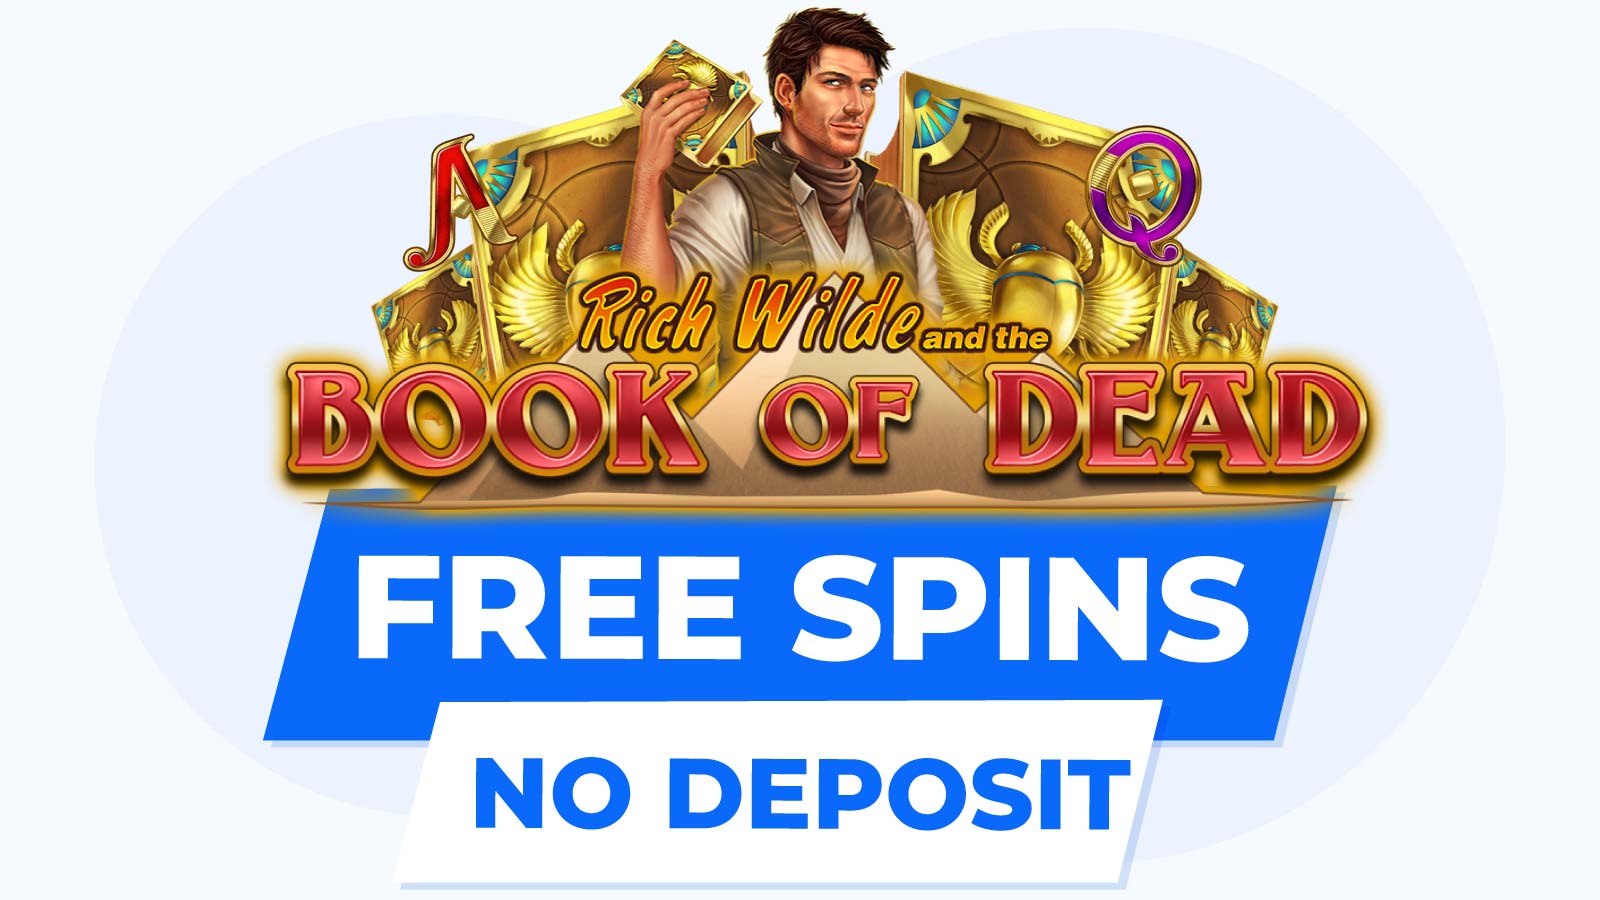 Free Spins No Deposit - The Best Offers in Canada